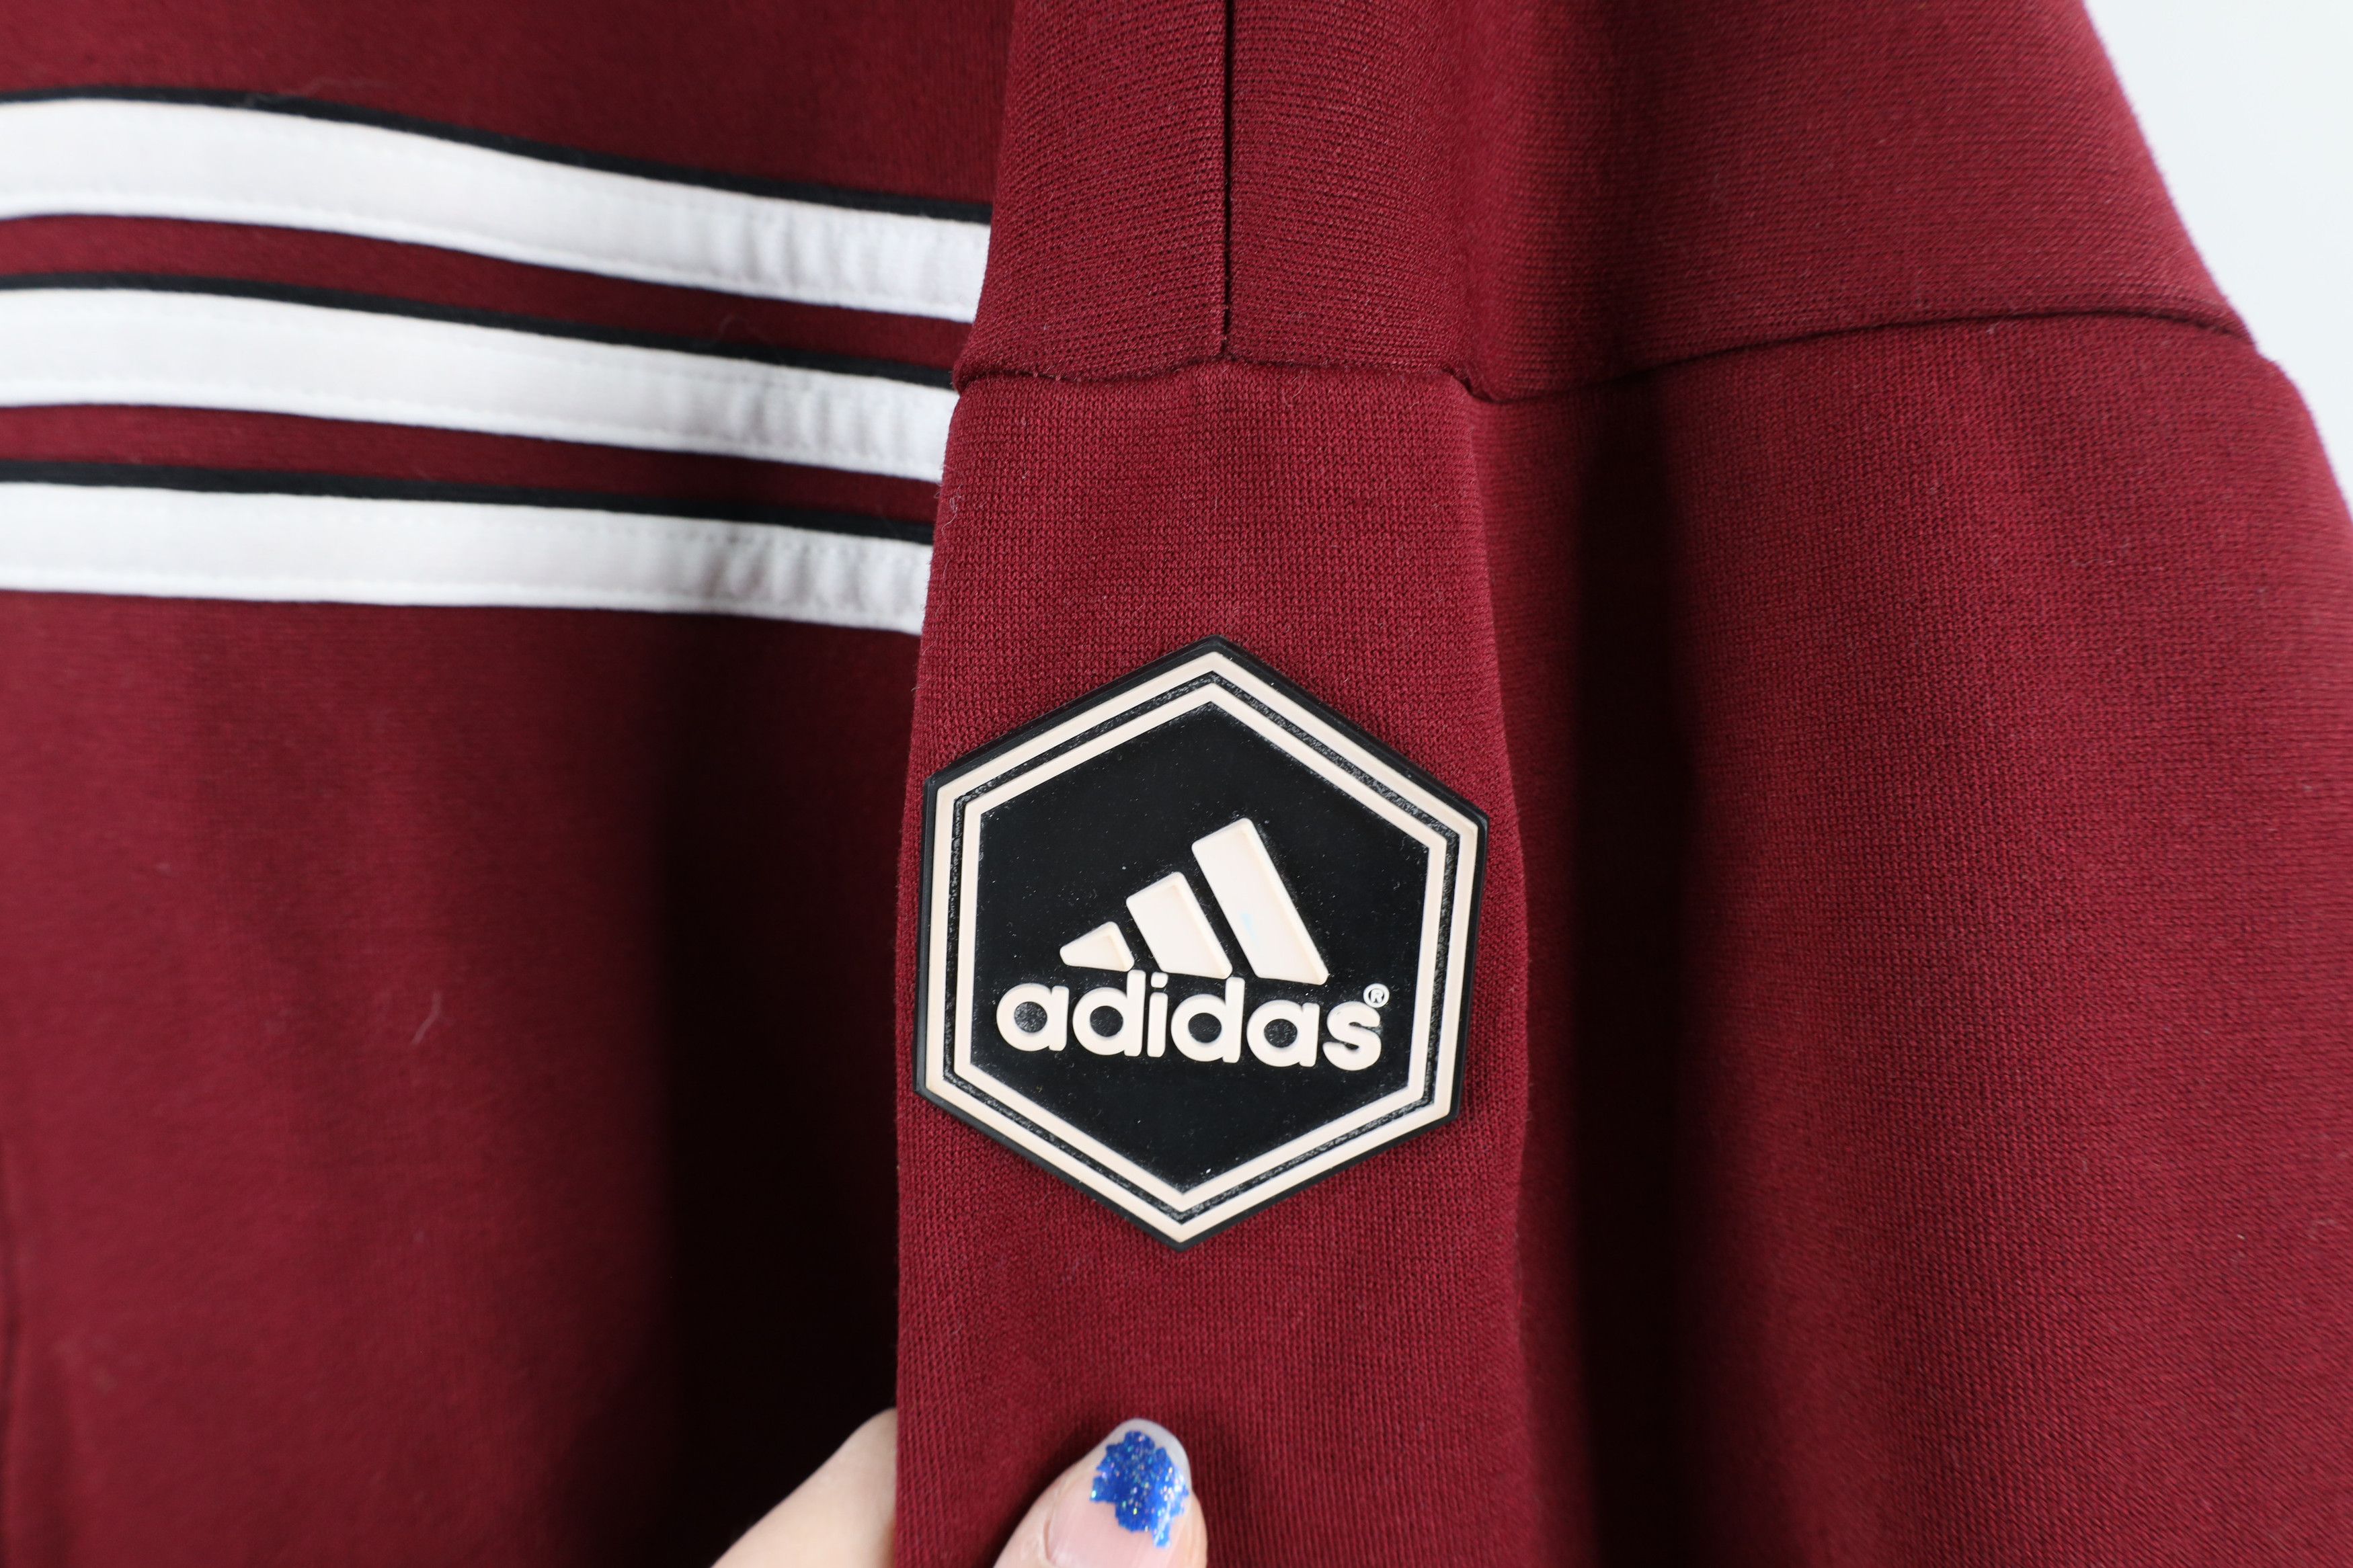 Adidas Vintage Adidas Spell Out Striped Soccer Warm Up Jacket Size US L / EU 52-54 / 3 - 4 Thumbnail